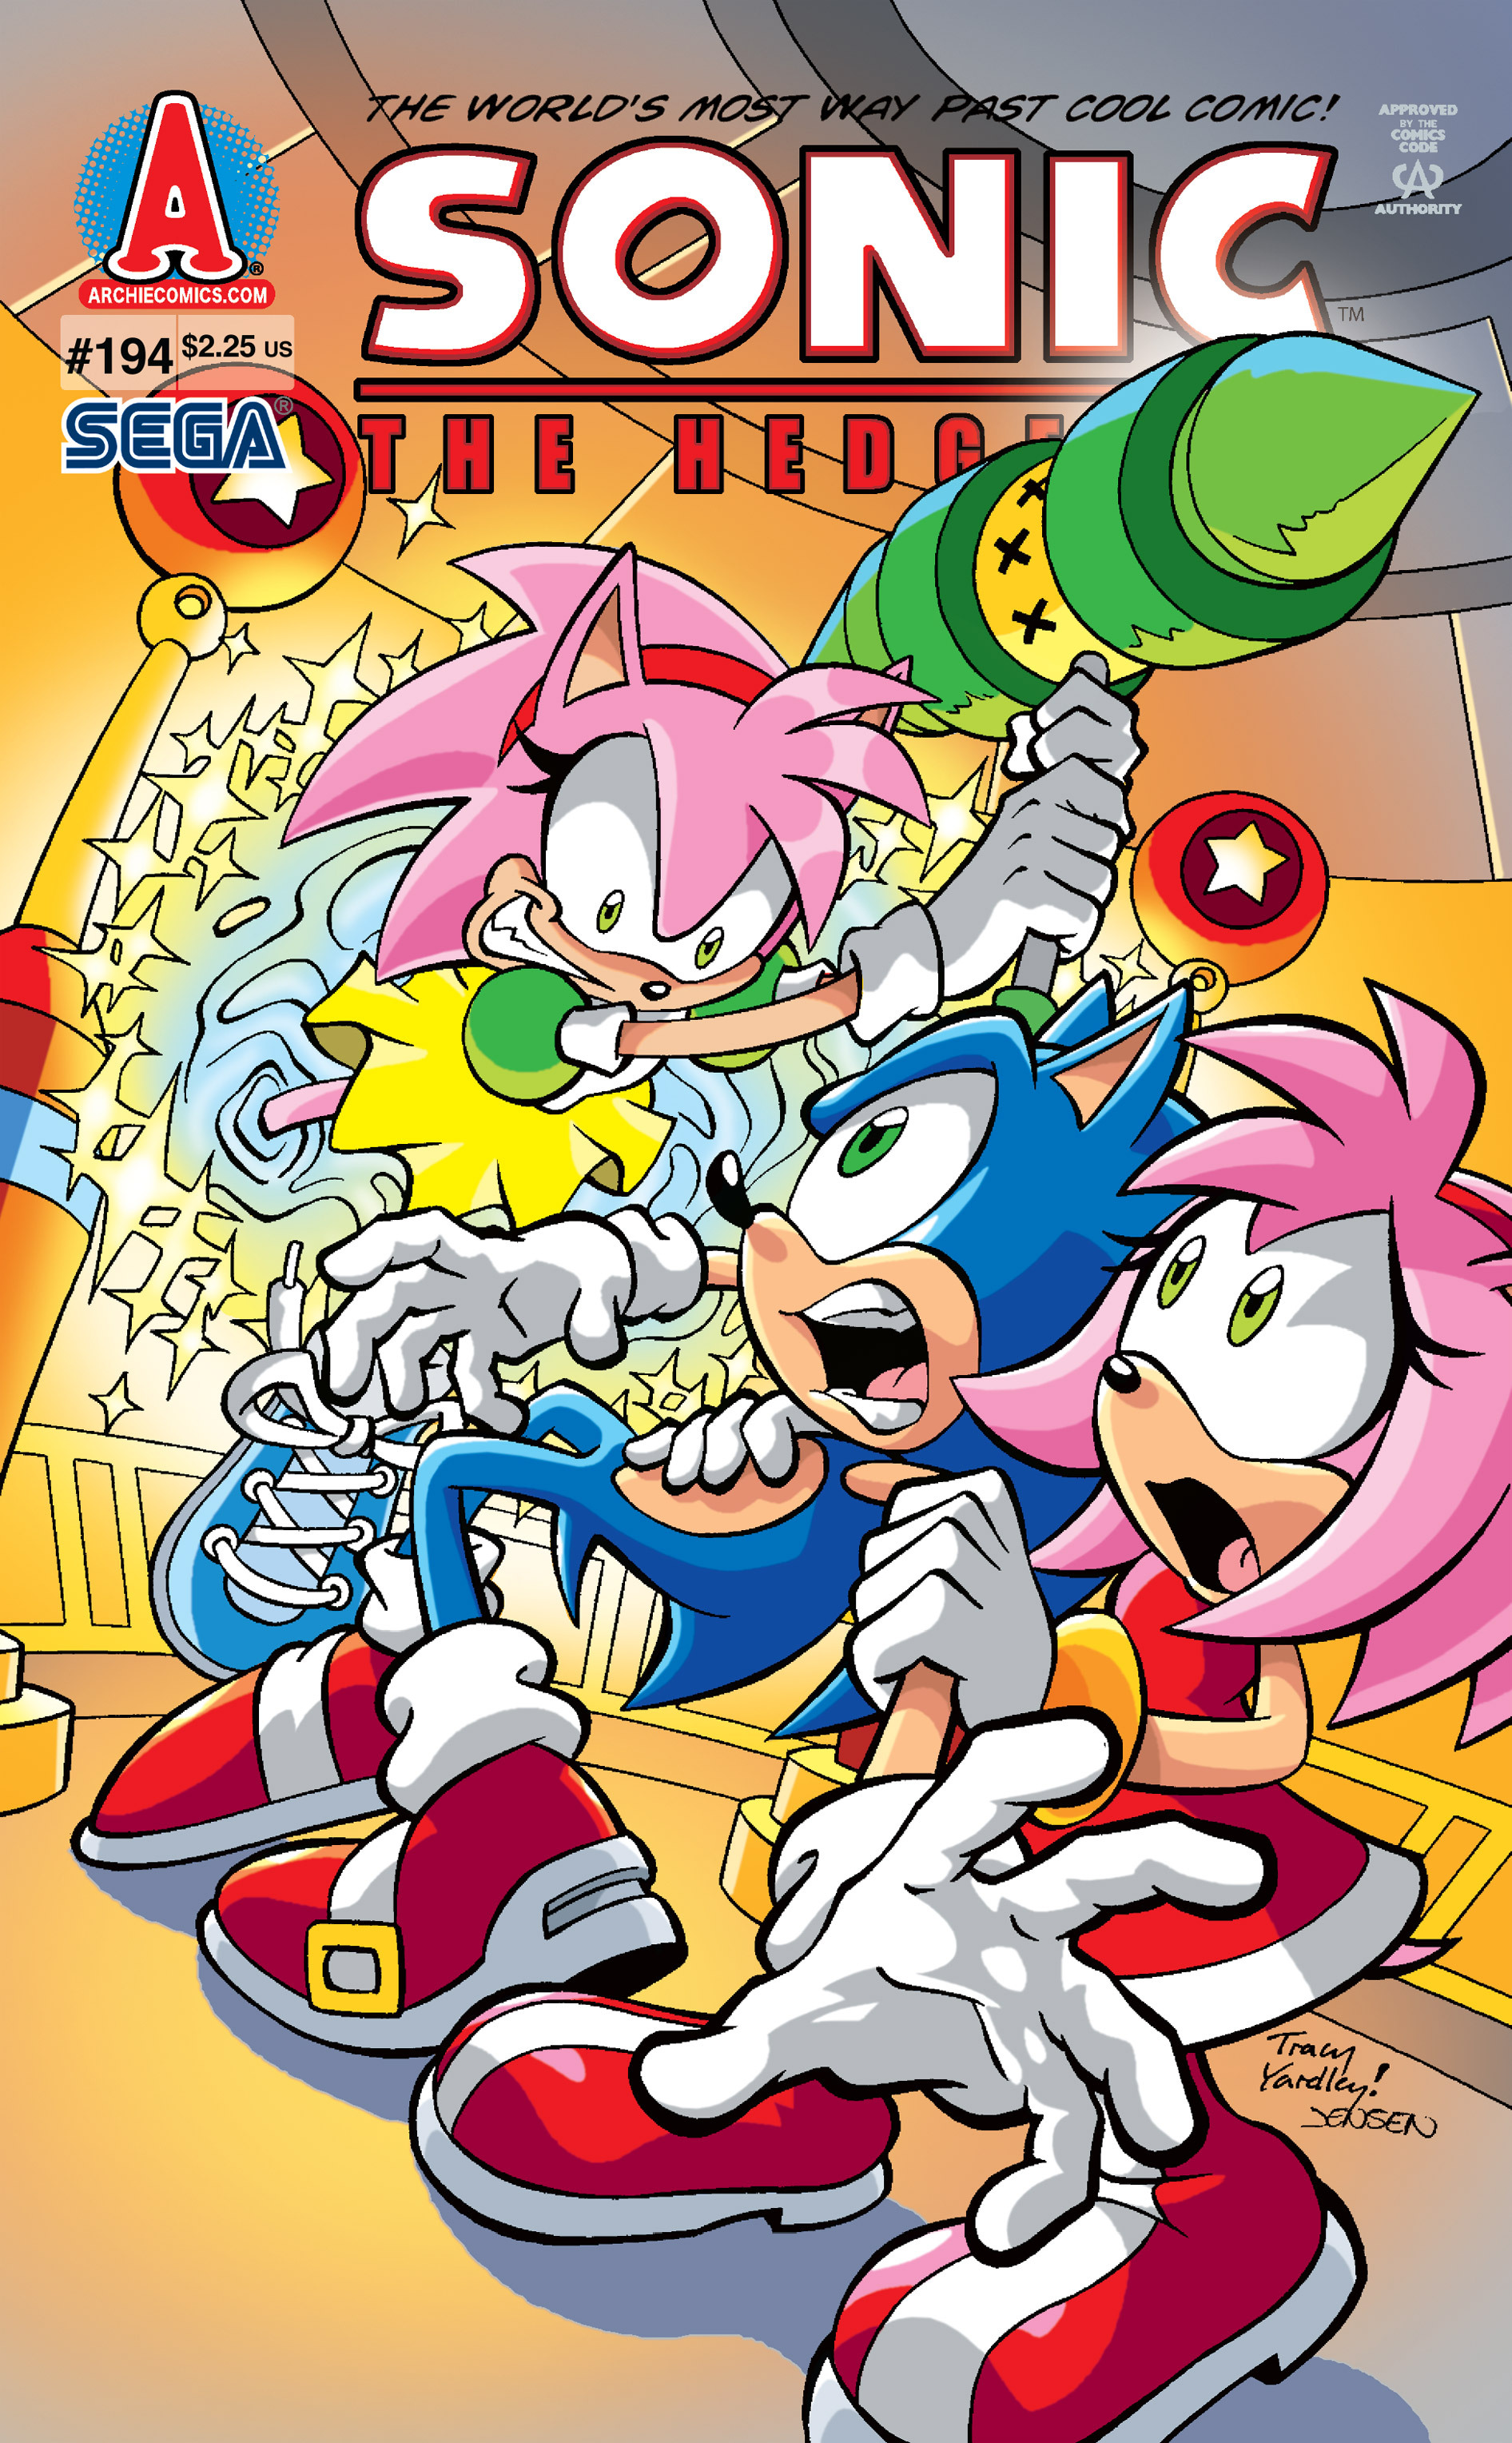 Archie Sonic The Hedgehog Issue 194 Sonic News Network Fandom